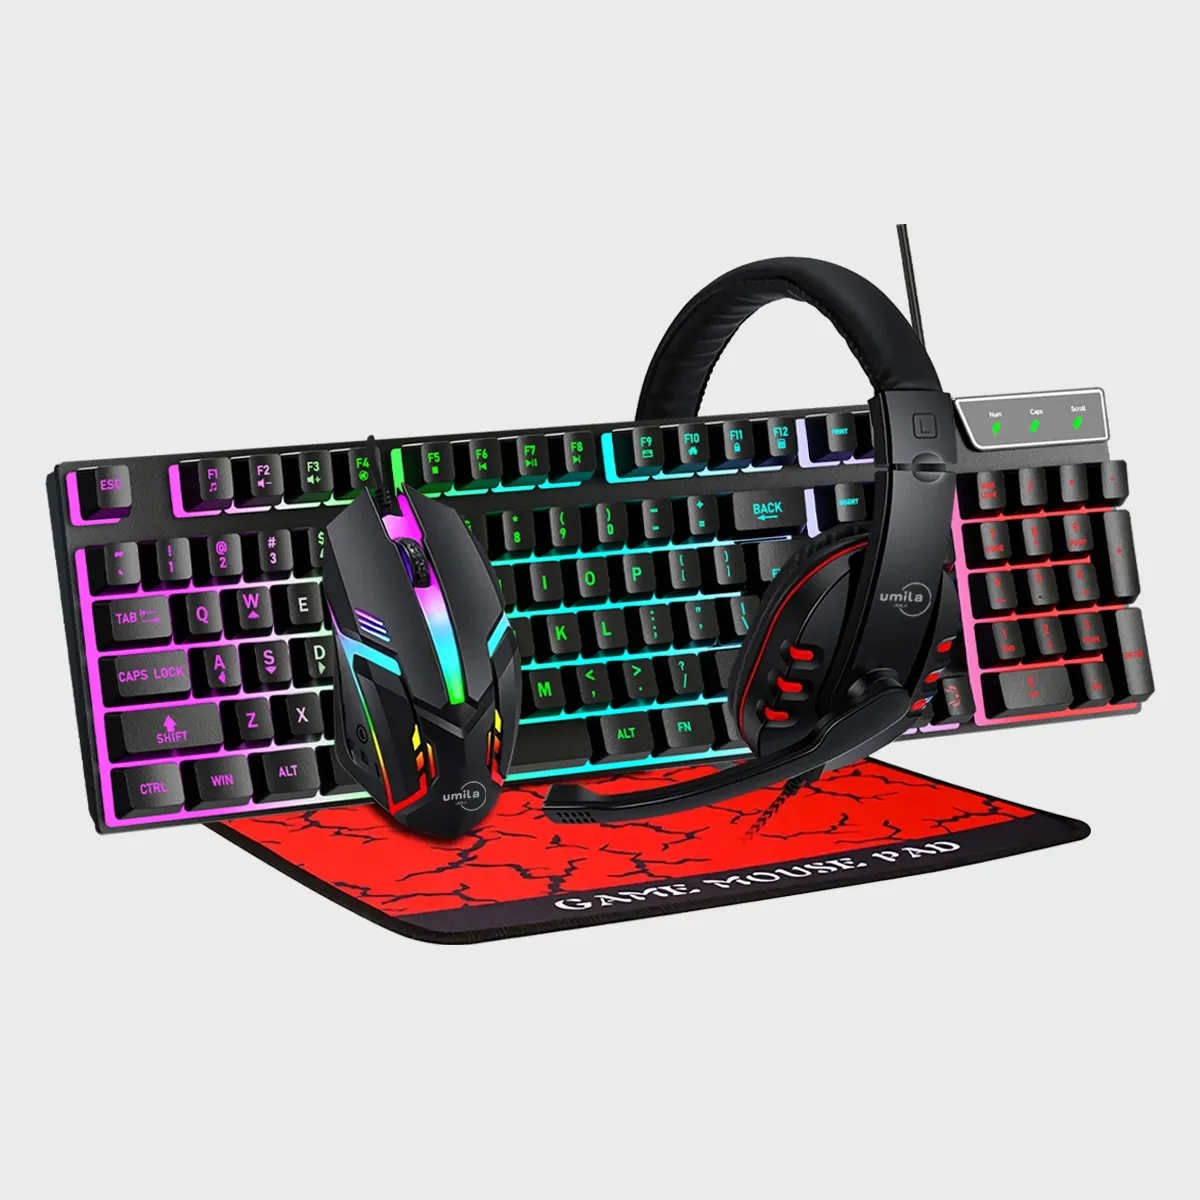 In Stock amazon Wholesale Prices 104 Keys RGB Colorful Backlit Gaming Keyboard And Mouse headset headphone Gaming combo